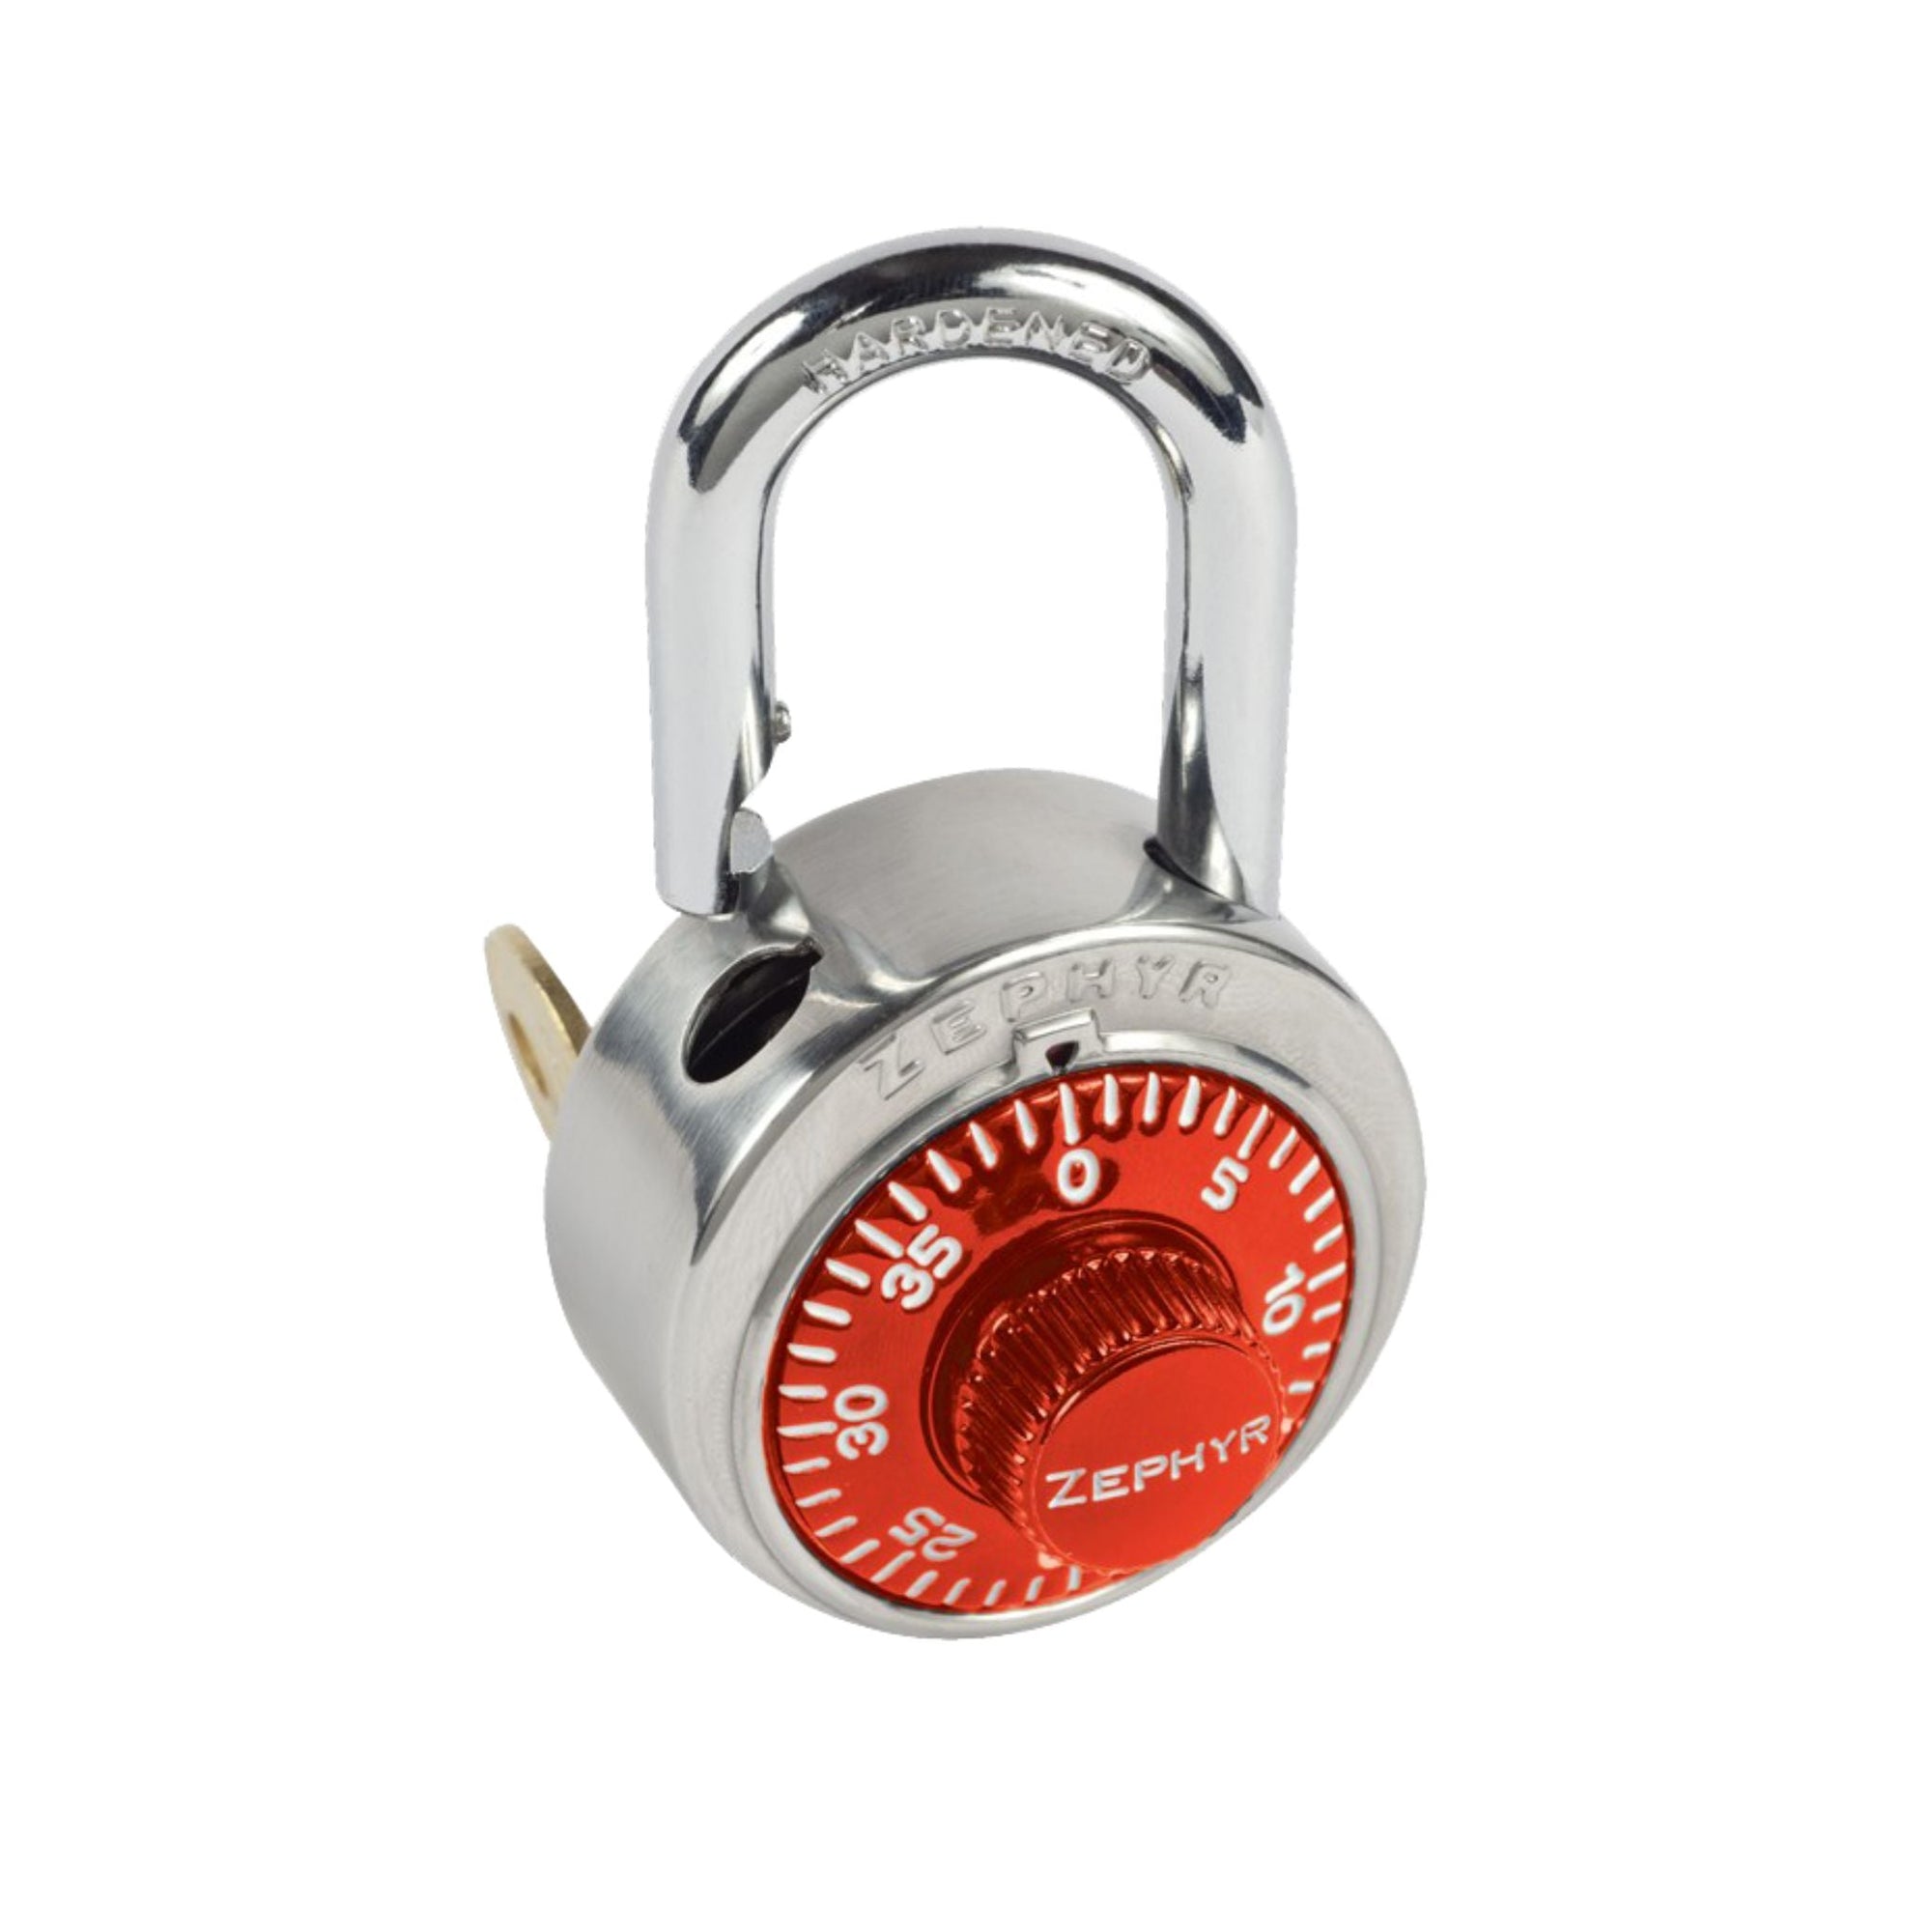 Zephyr Lock 1925RED Locker Locks Feature 3-Digit Dialing (Red Dial) With Control Key Override for Supervisory Access - The Lock Source